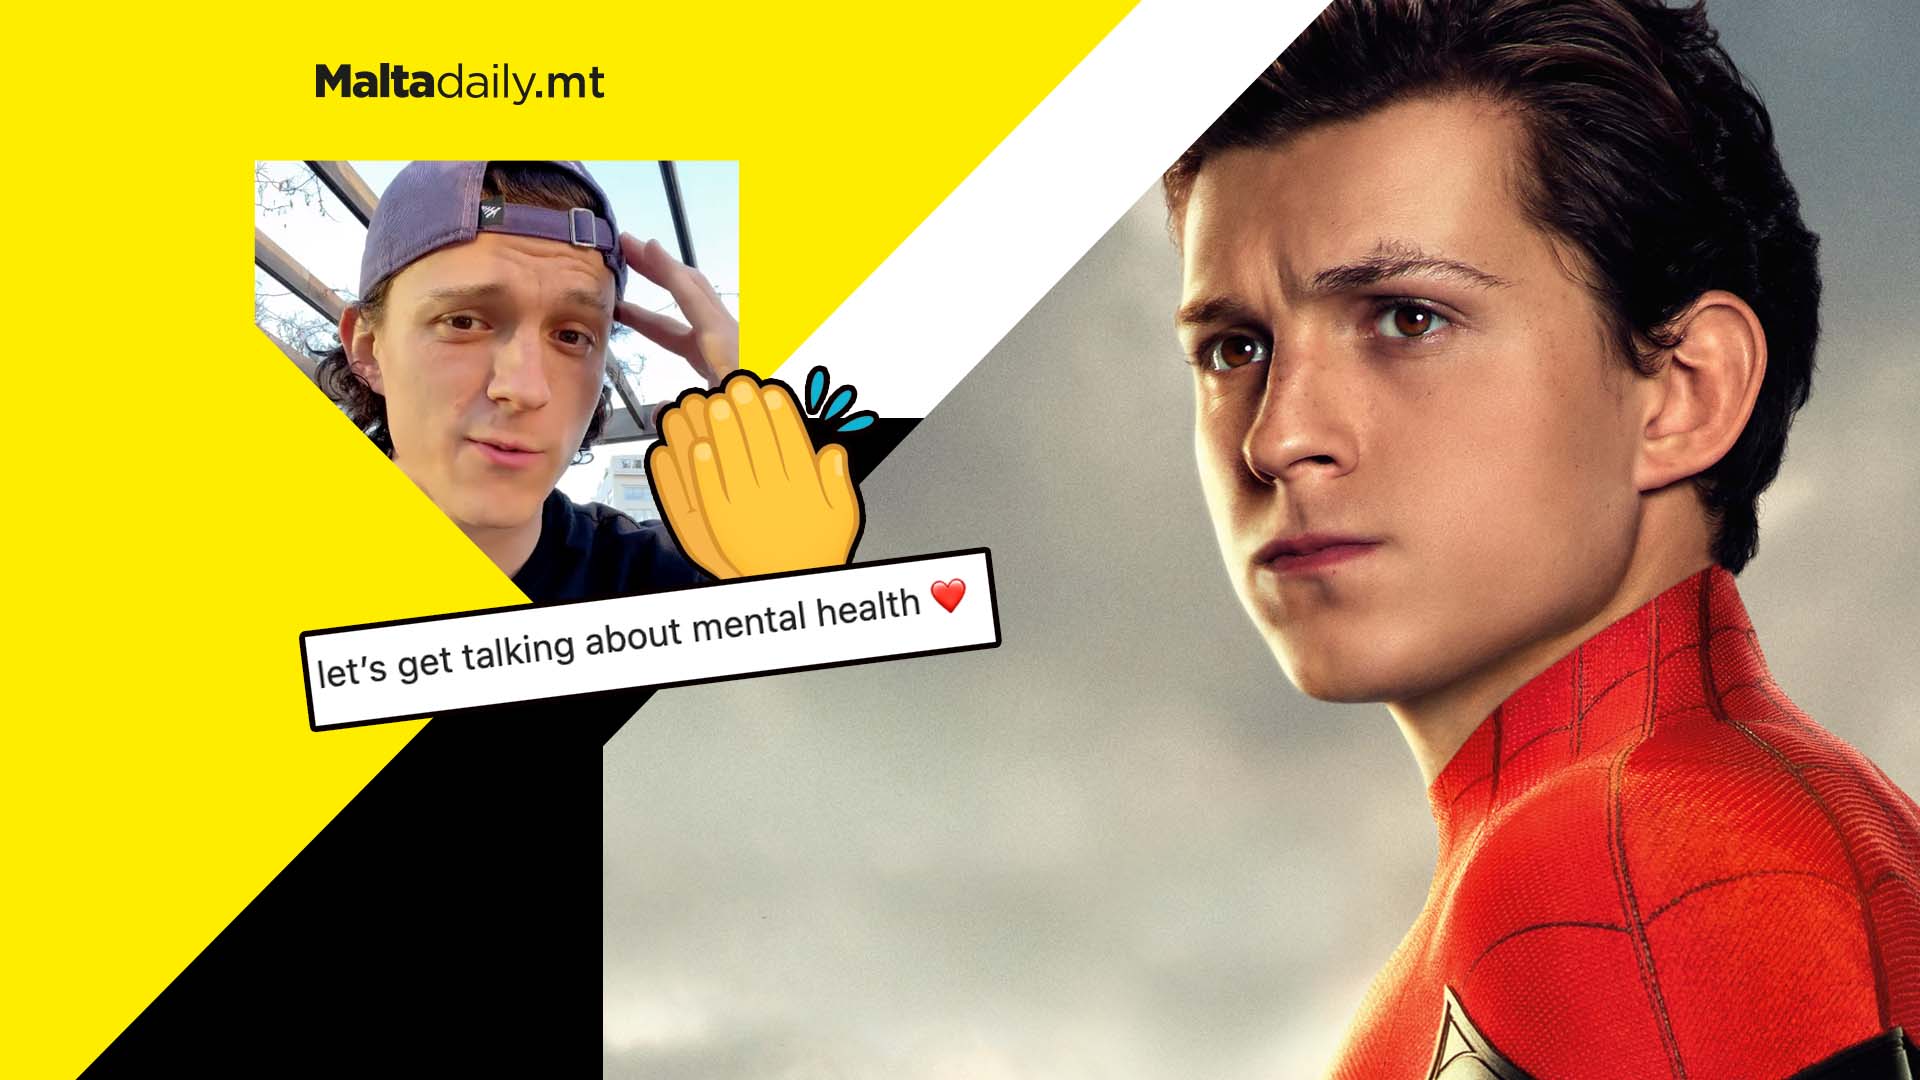 Tom Holland returns from social media break to support mental health charities